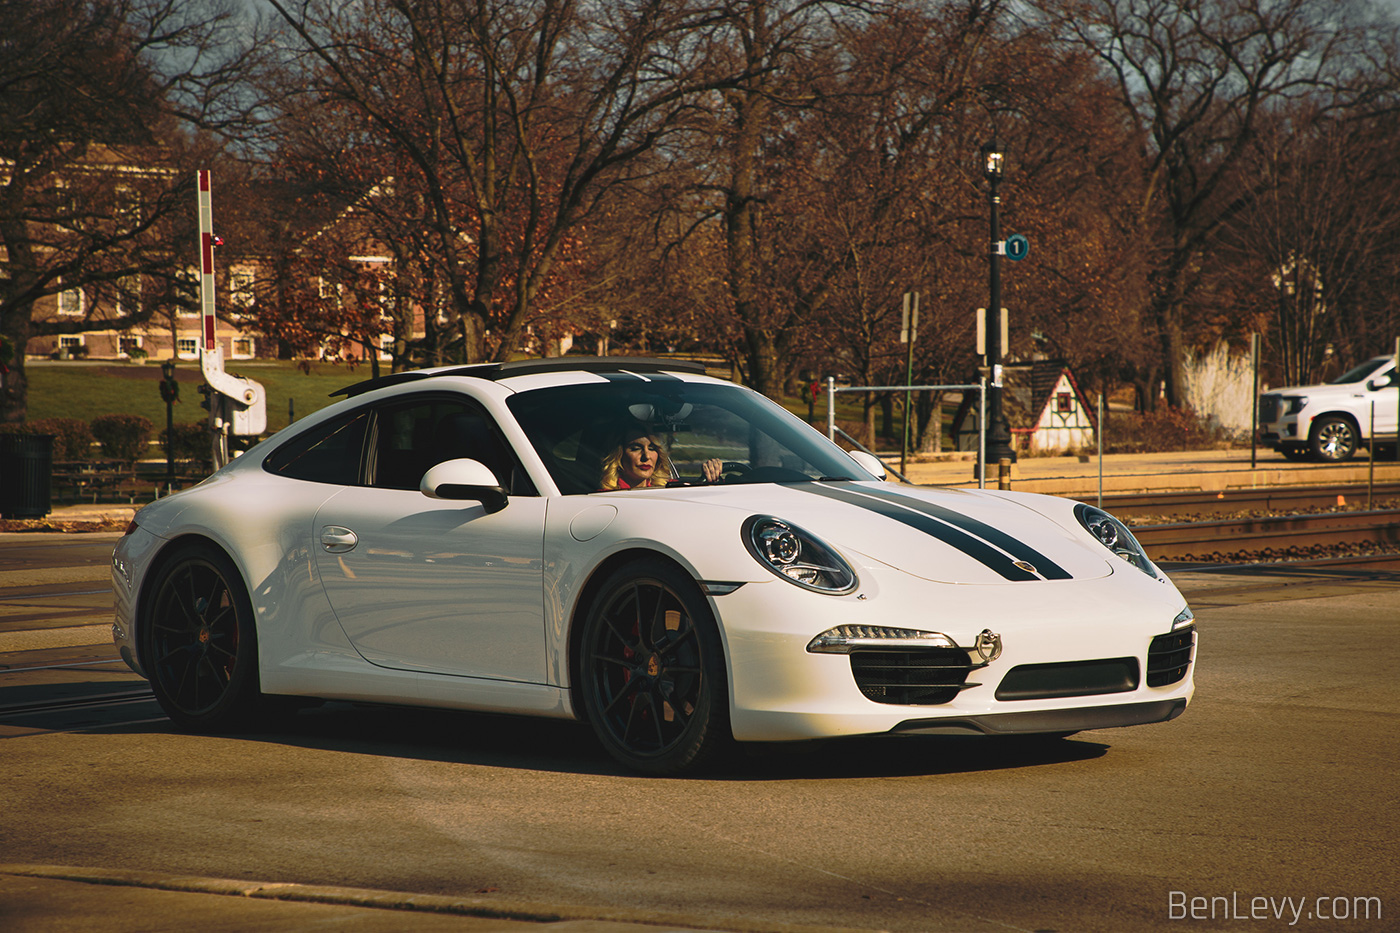 White Porsche 911 by the train tracks in Hinsdale